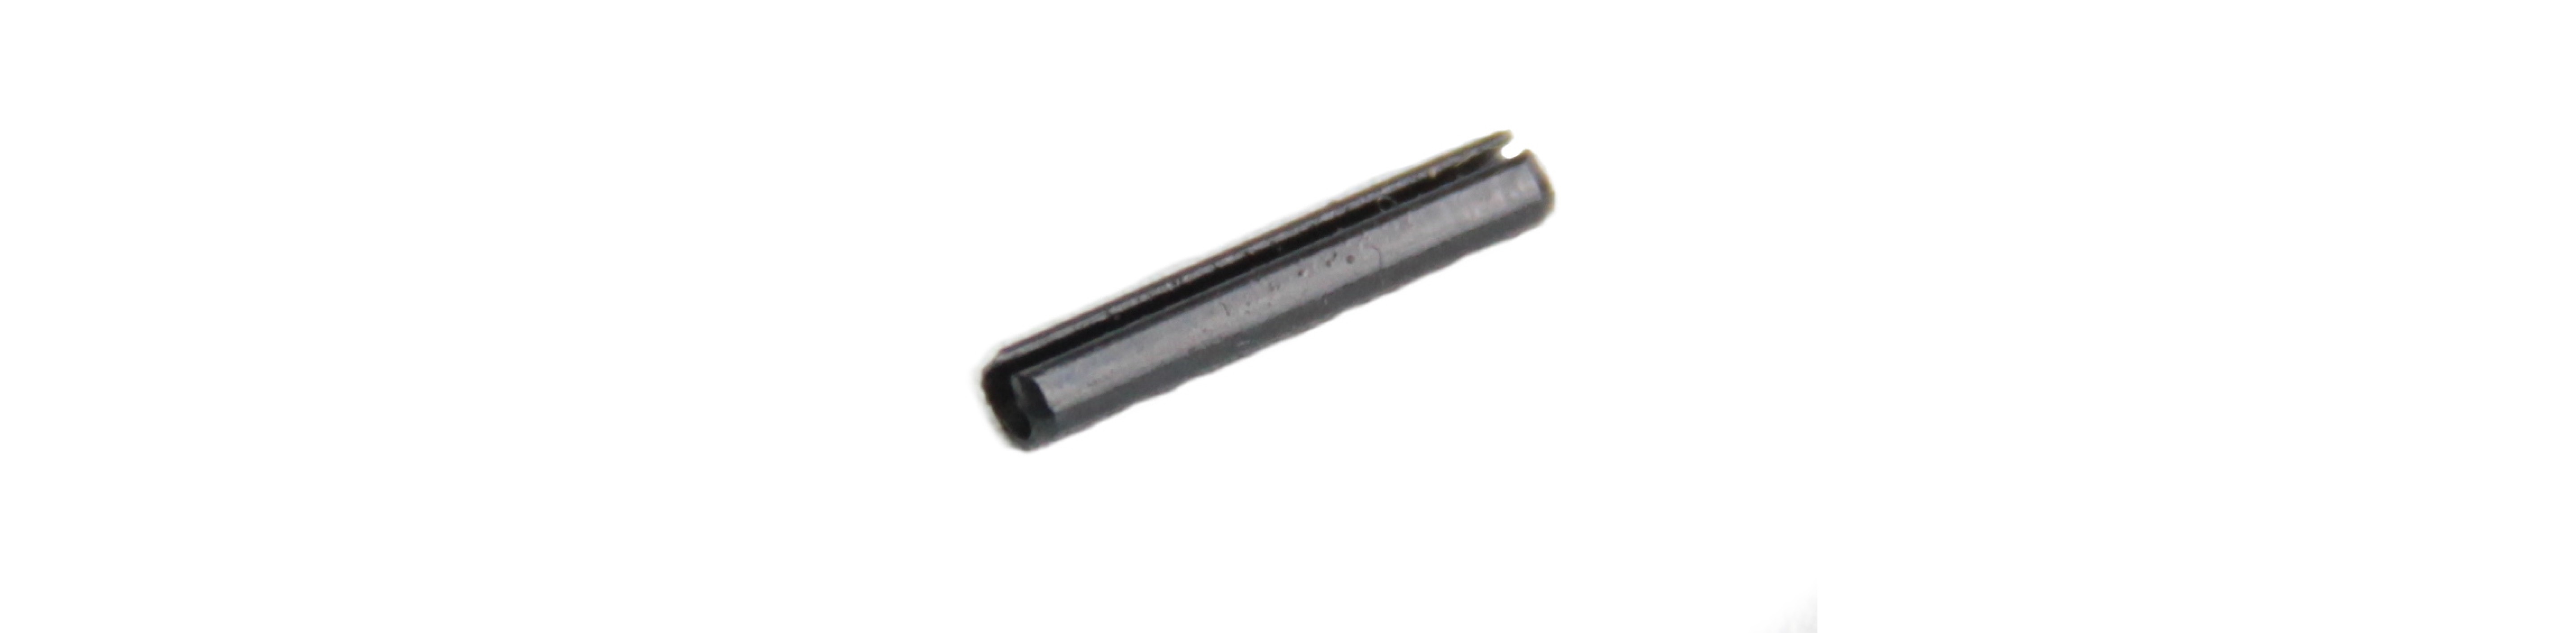 ejector pin AR-15